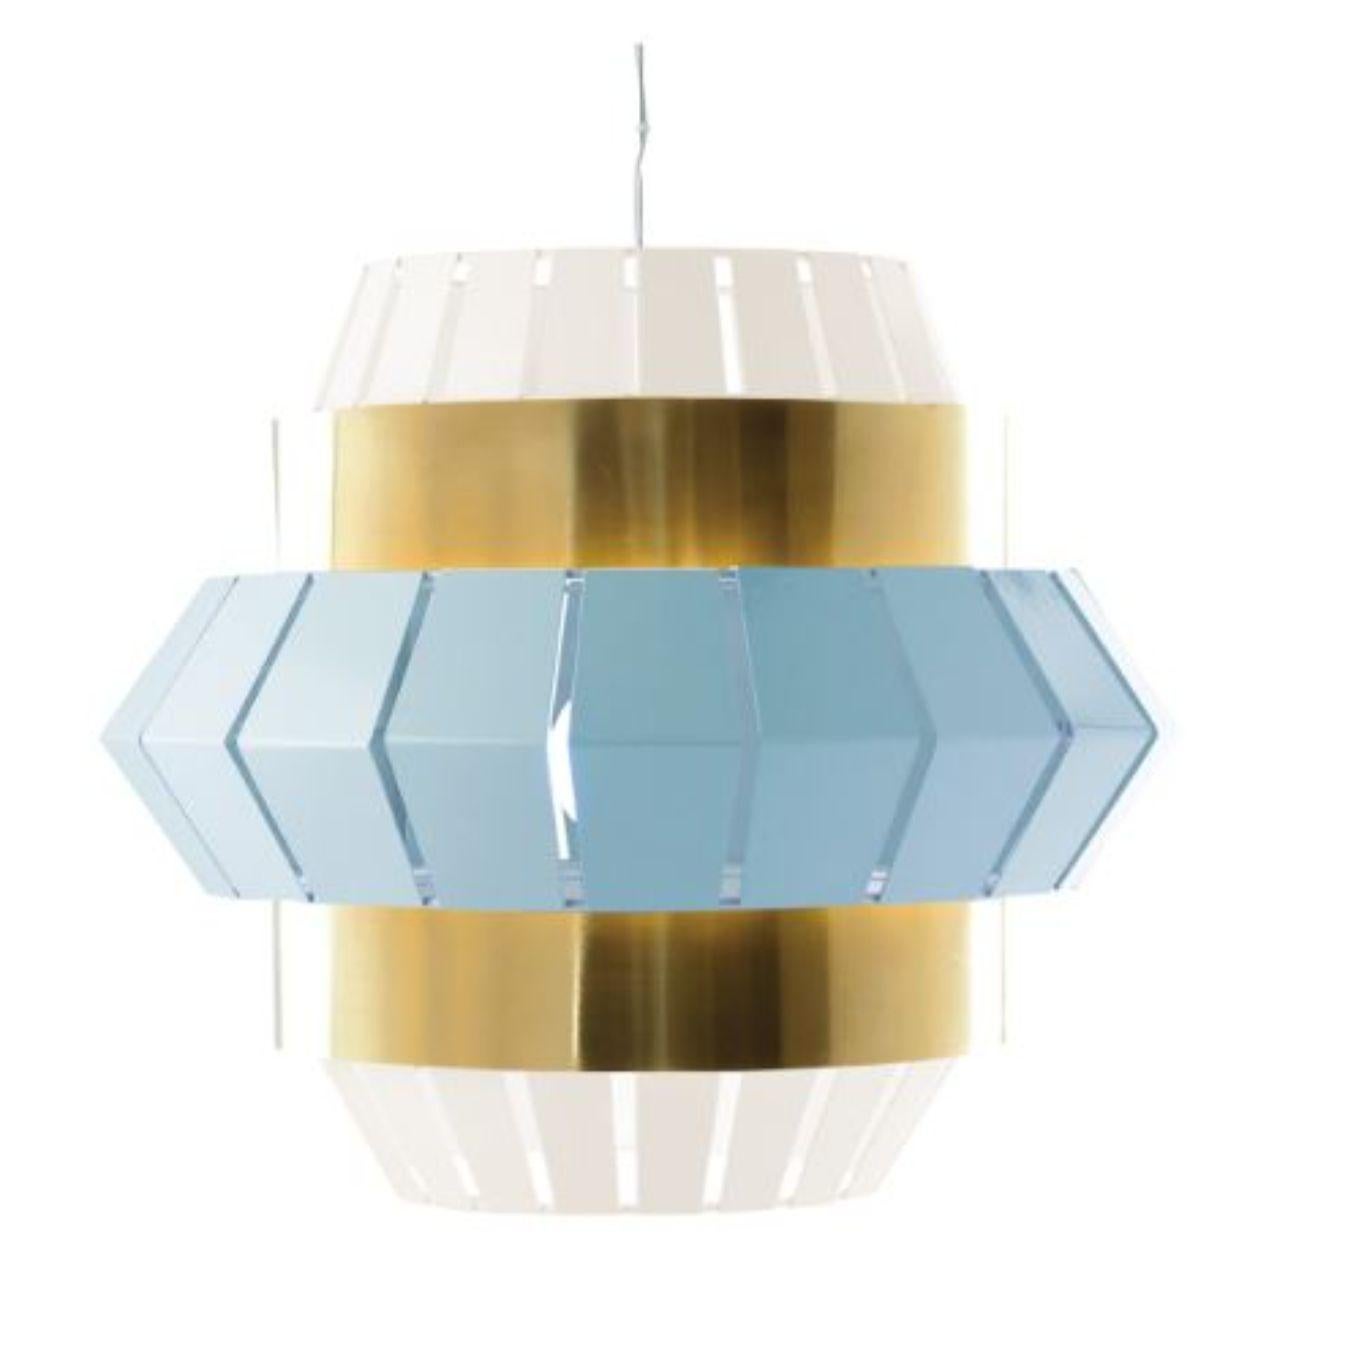 Ivory and Jade Comb Suspension lamp with brass ring by Dooq
Dimensions: W 74 x D 74 x H 60 cm
Materials: lacquered metal, polished brass.
Also available in different colors and materials.

Information:
230V/50Hz
E27/1x20W LED
120V/60Hz
E26/1x15W